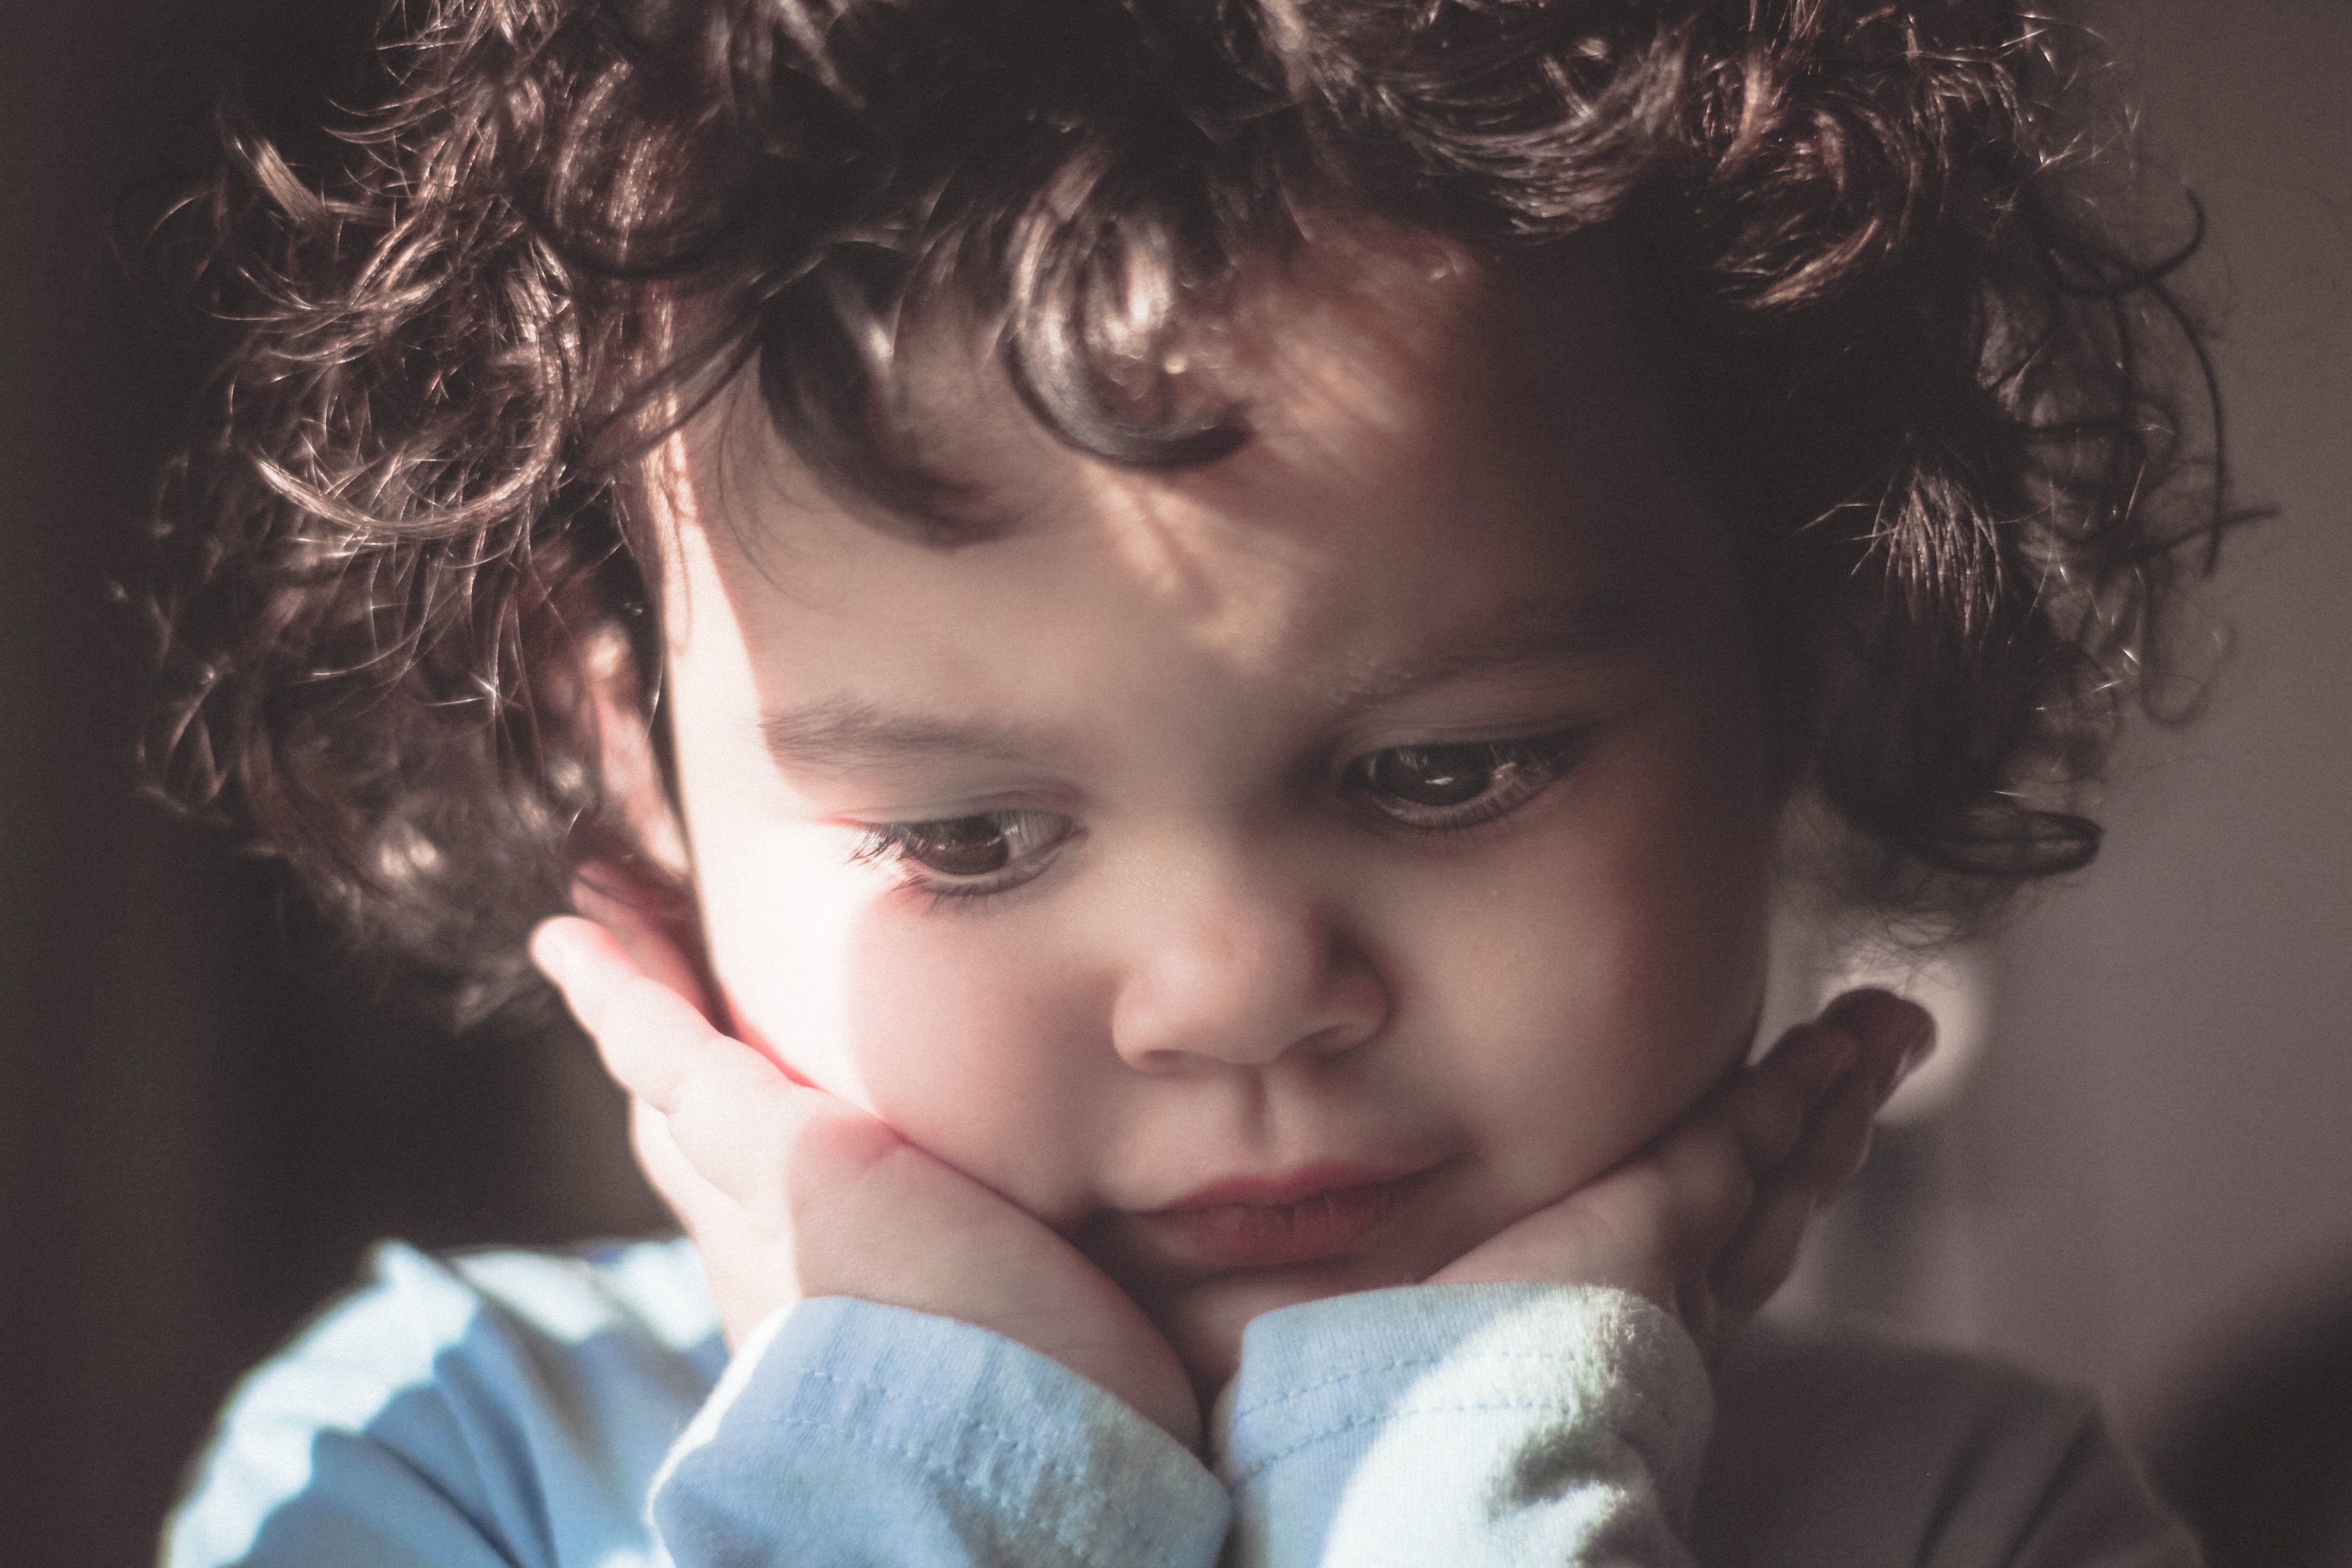 Toddler holding face looking thoughtful; image by Ricky Turner, via Unsplash.com.